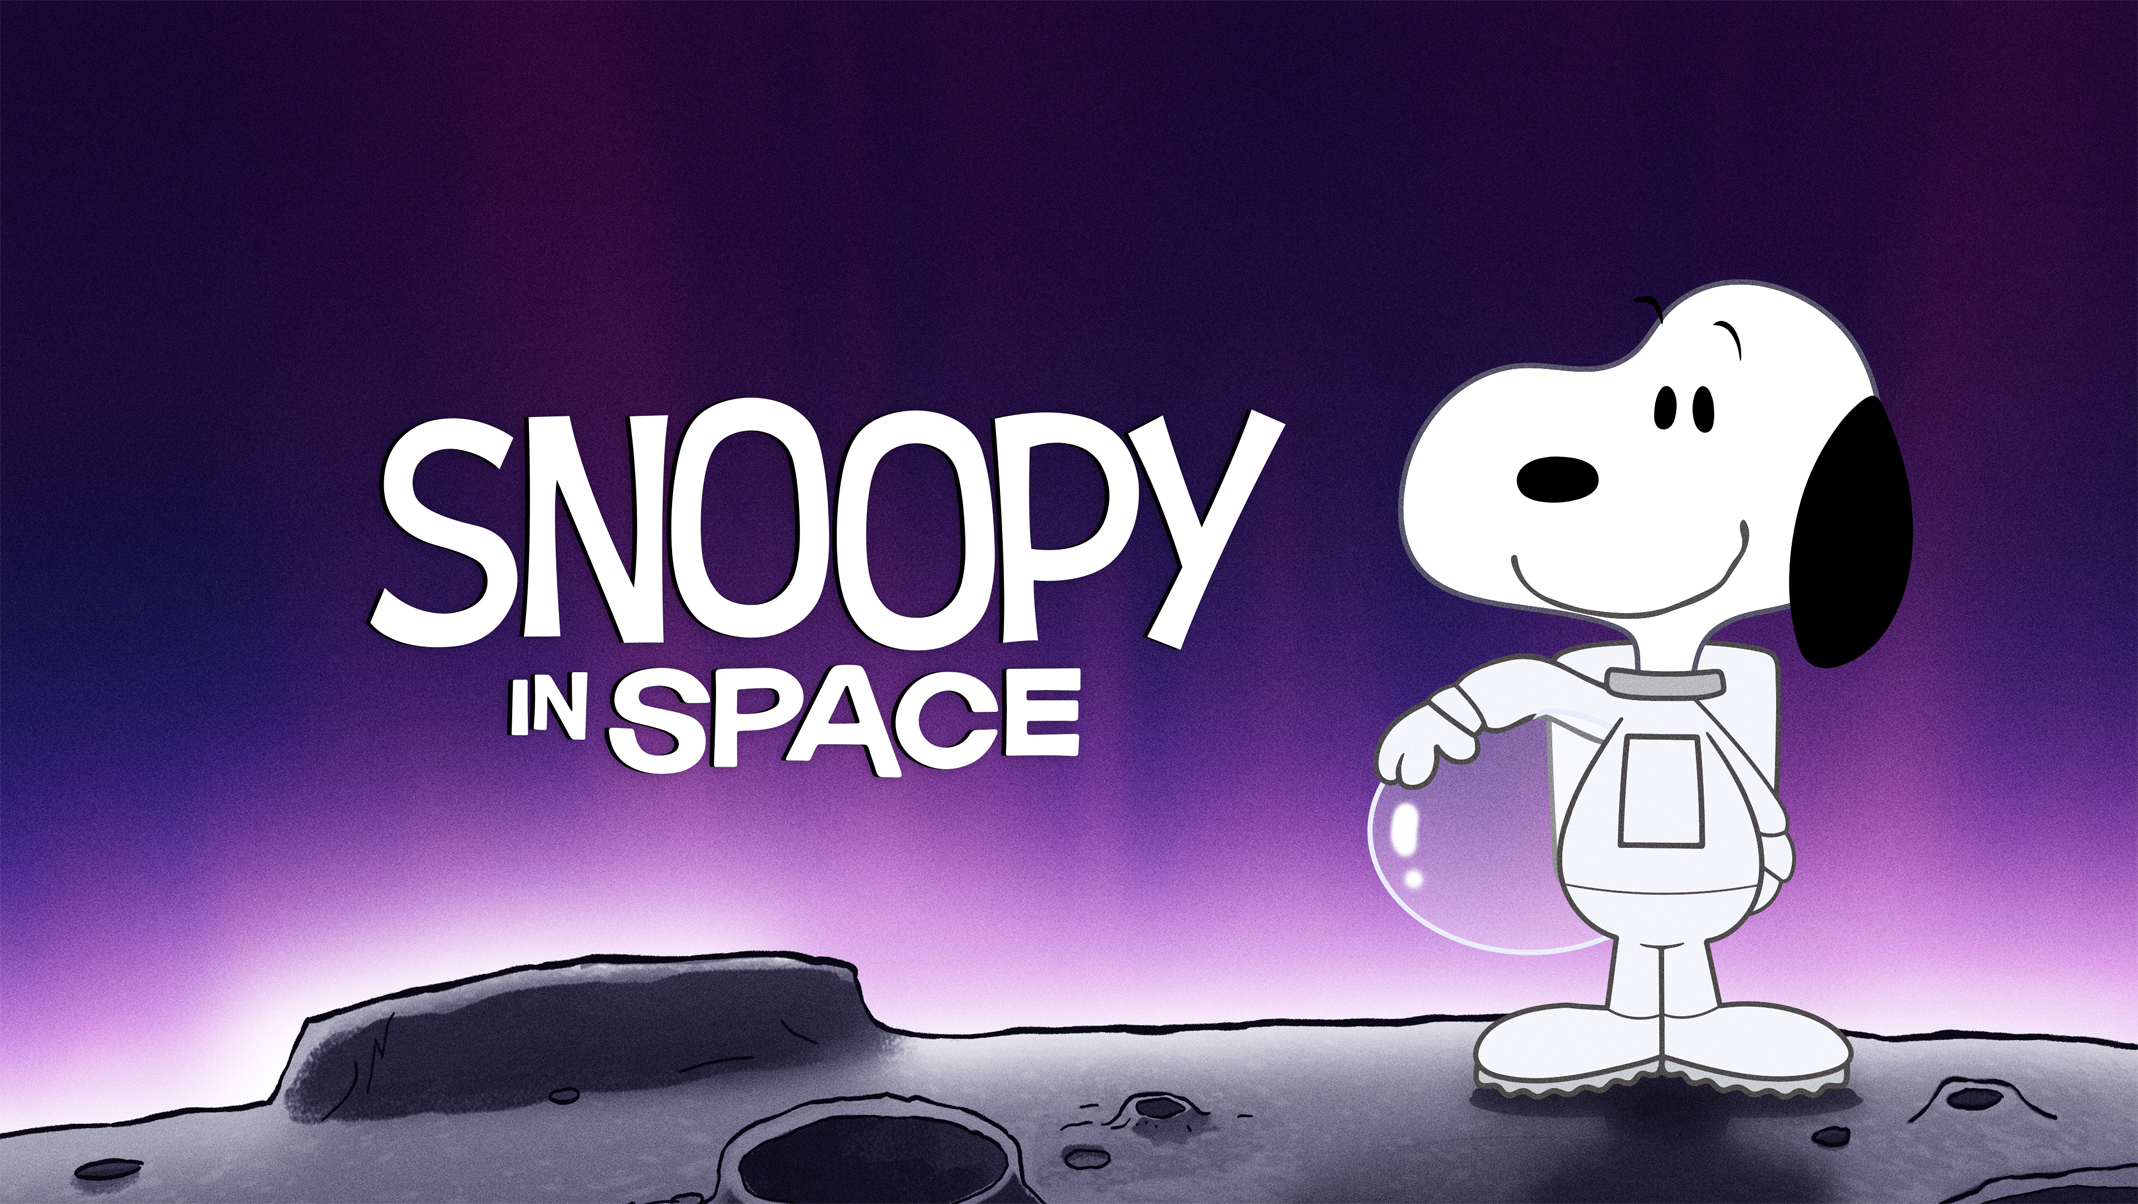 https://9to5mac.com/wp-content/uploads/sites/6/2019/10/Apple_TV_Snoopy_In_Space_Key_Art_sh_cr.jpg.large_2x.jpg?quality=82&strip=all